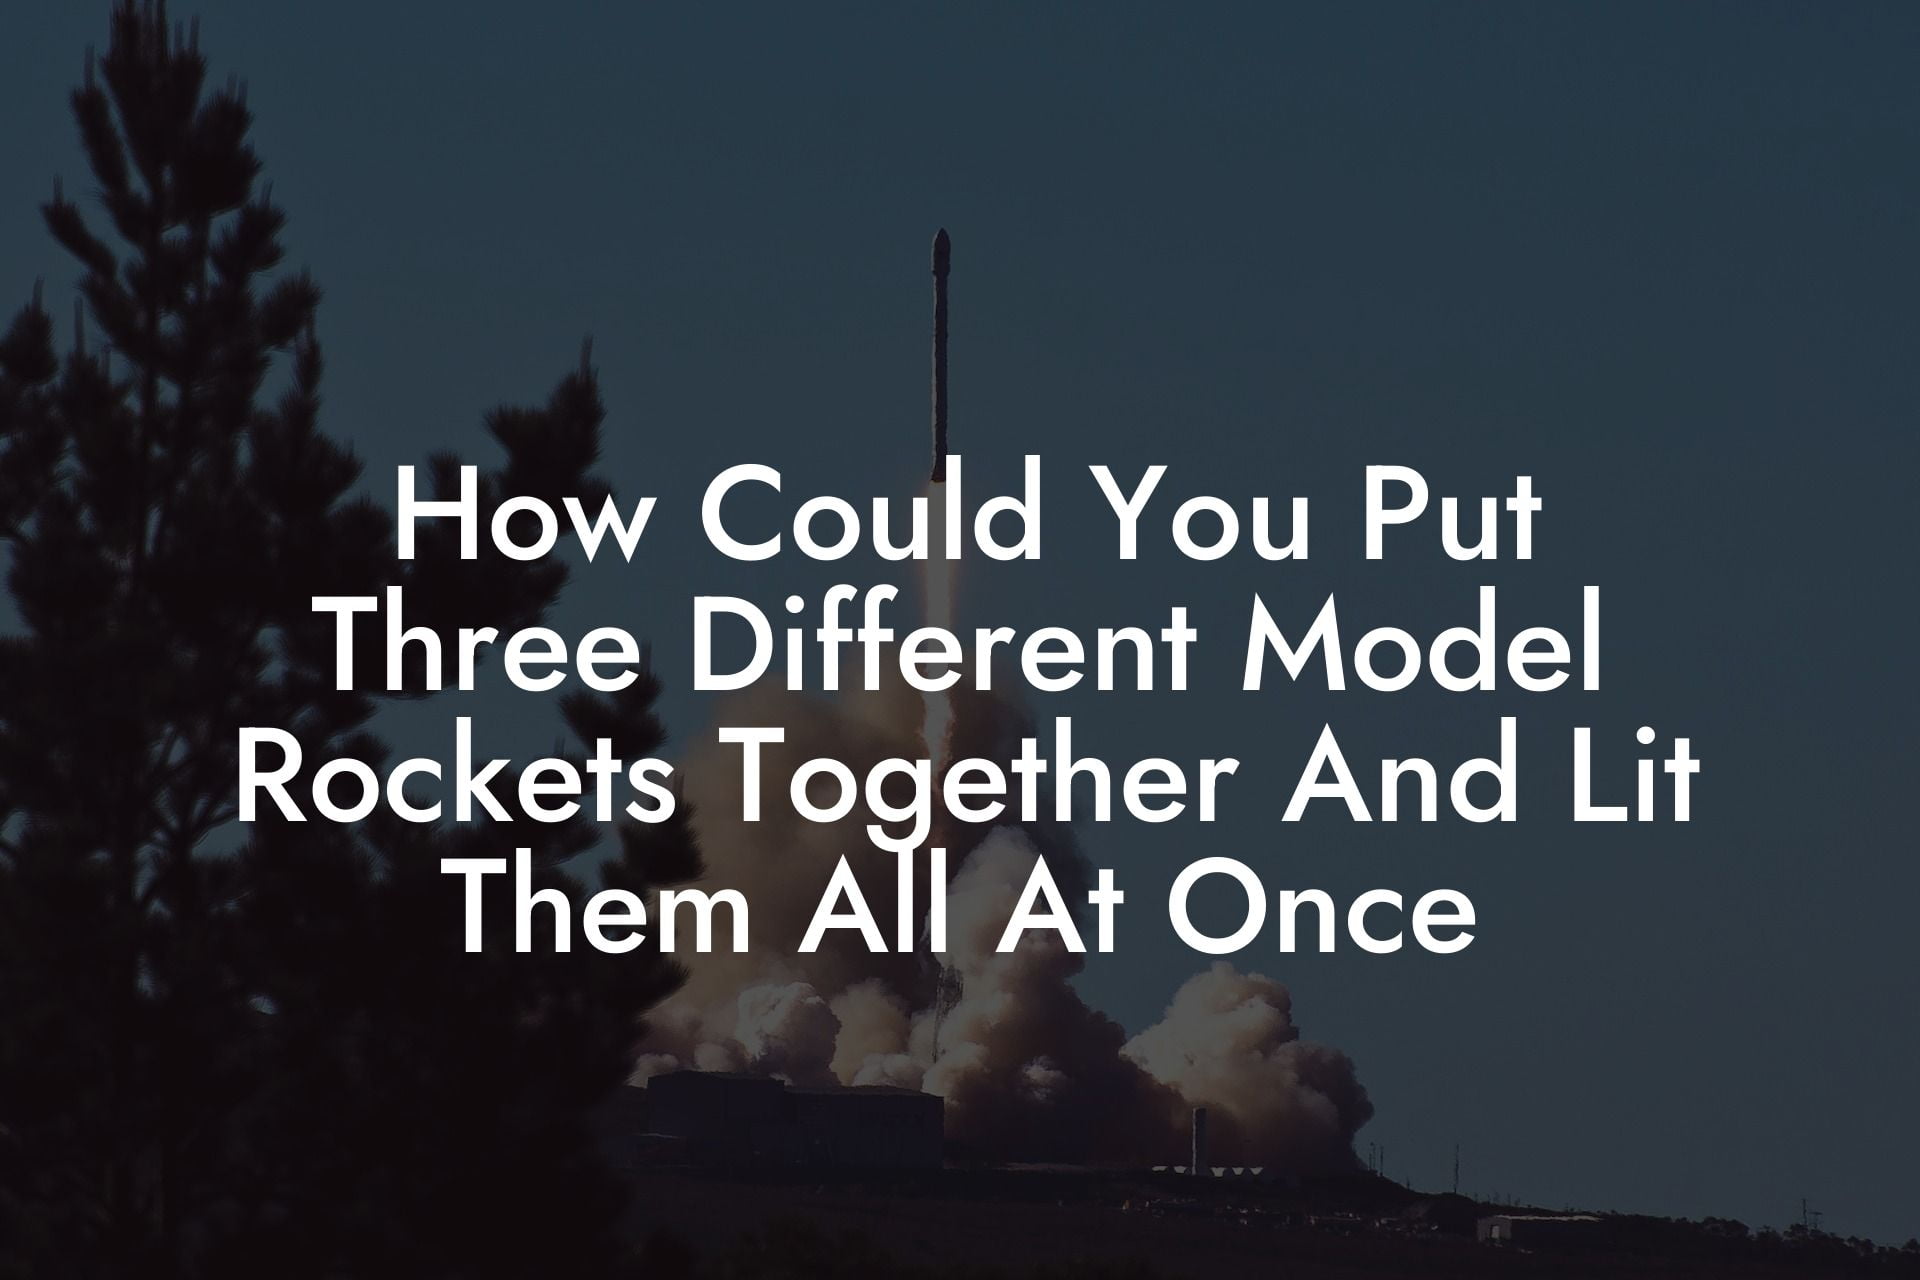 How Could You Put Three Different Model Rockets Together And Lit Them All At Once